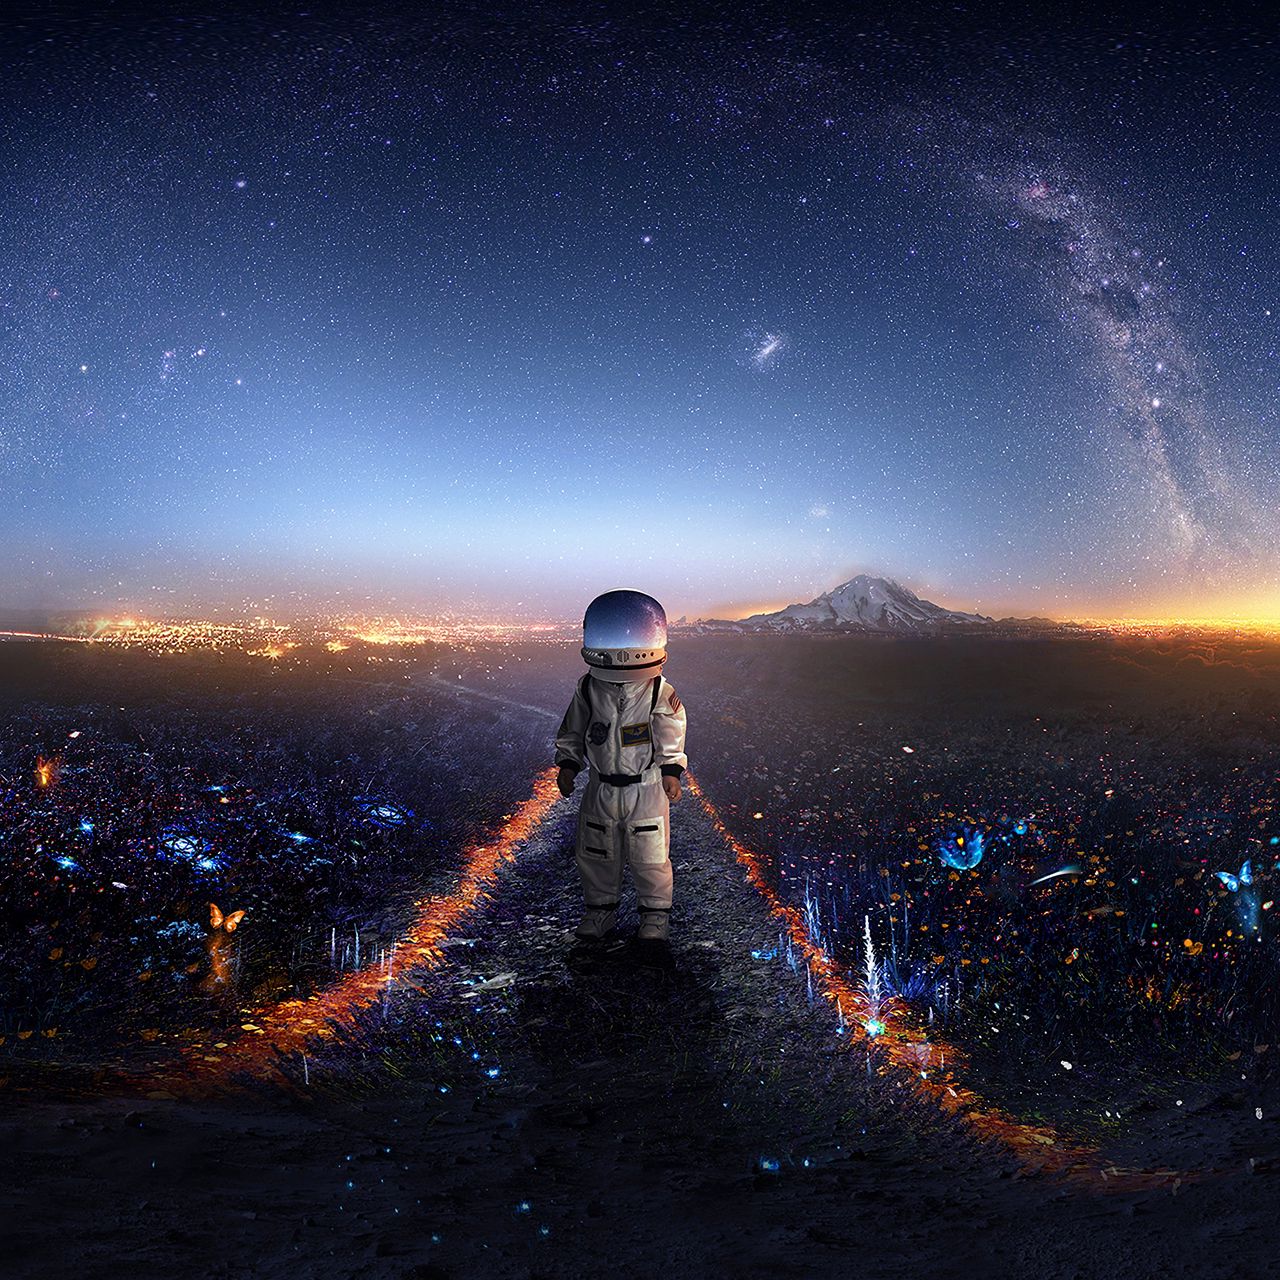 Download Astronaut wallpapers for mobile phone free Astronaut HD  pictures